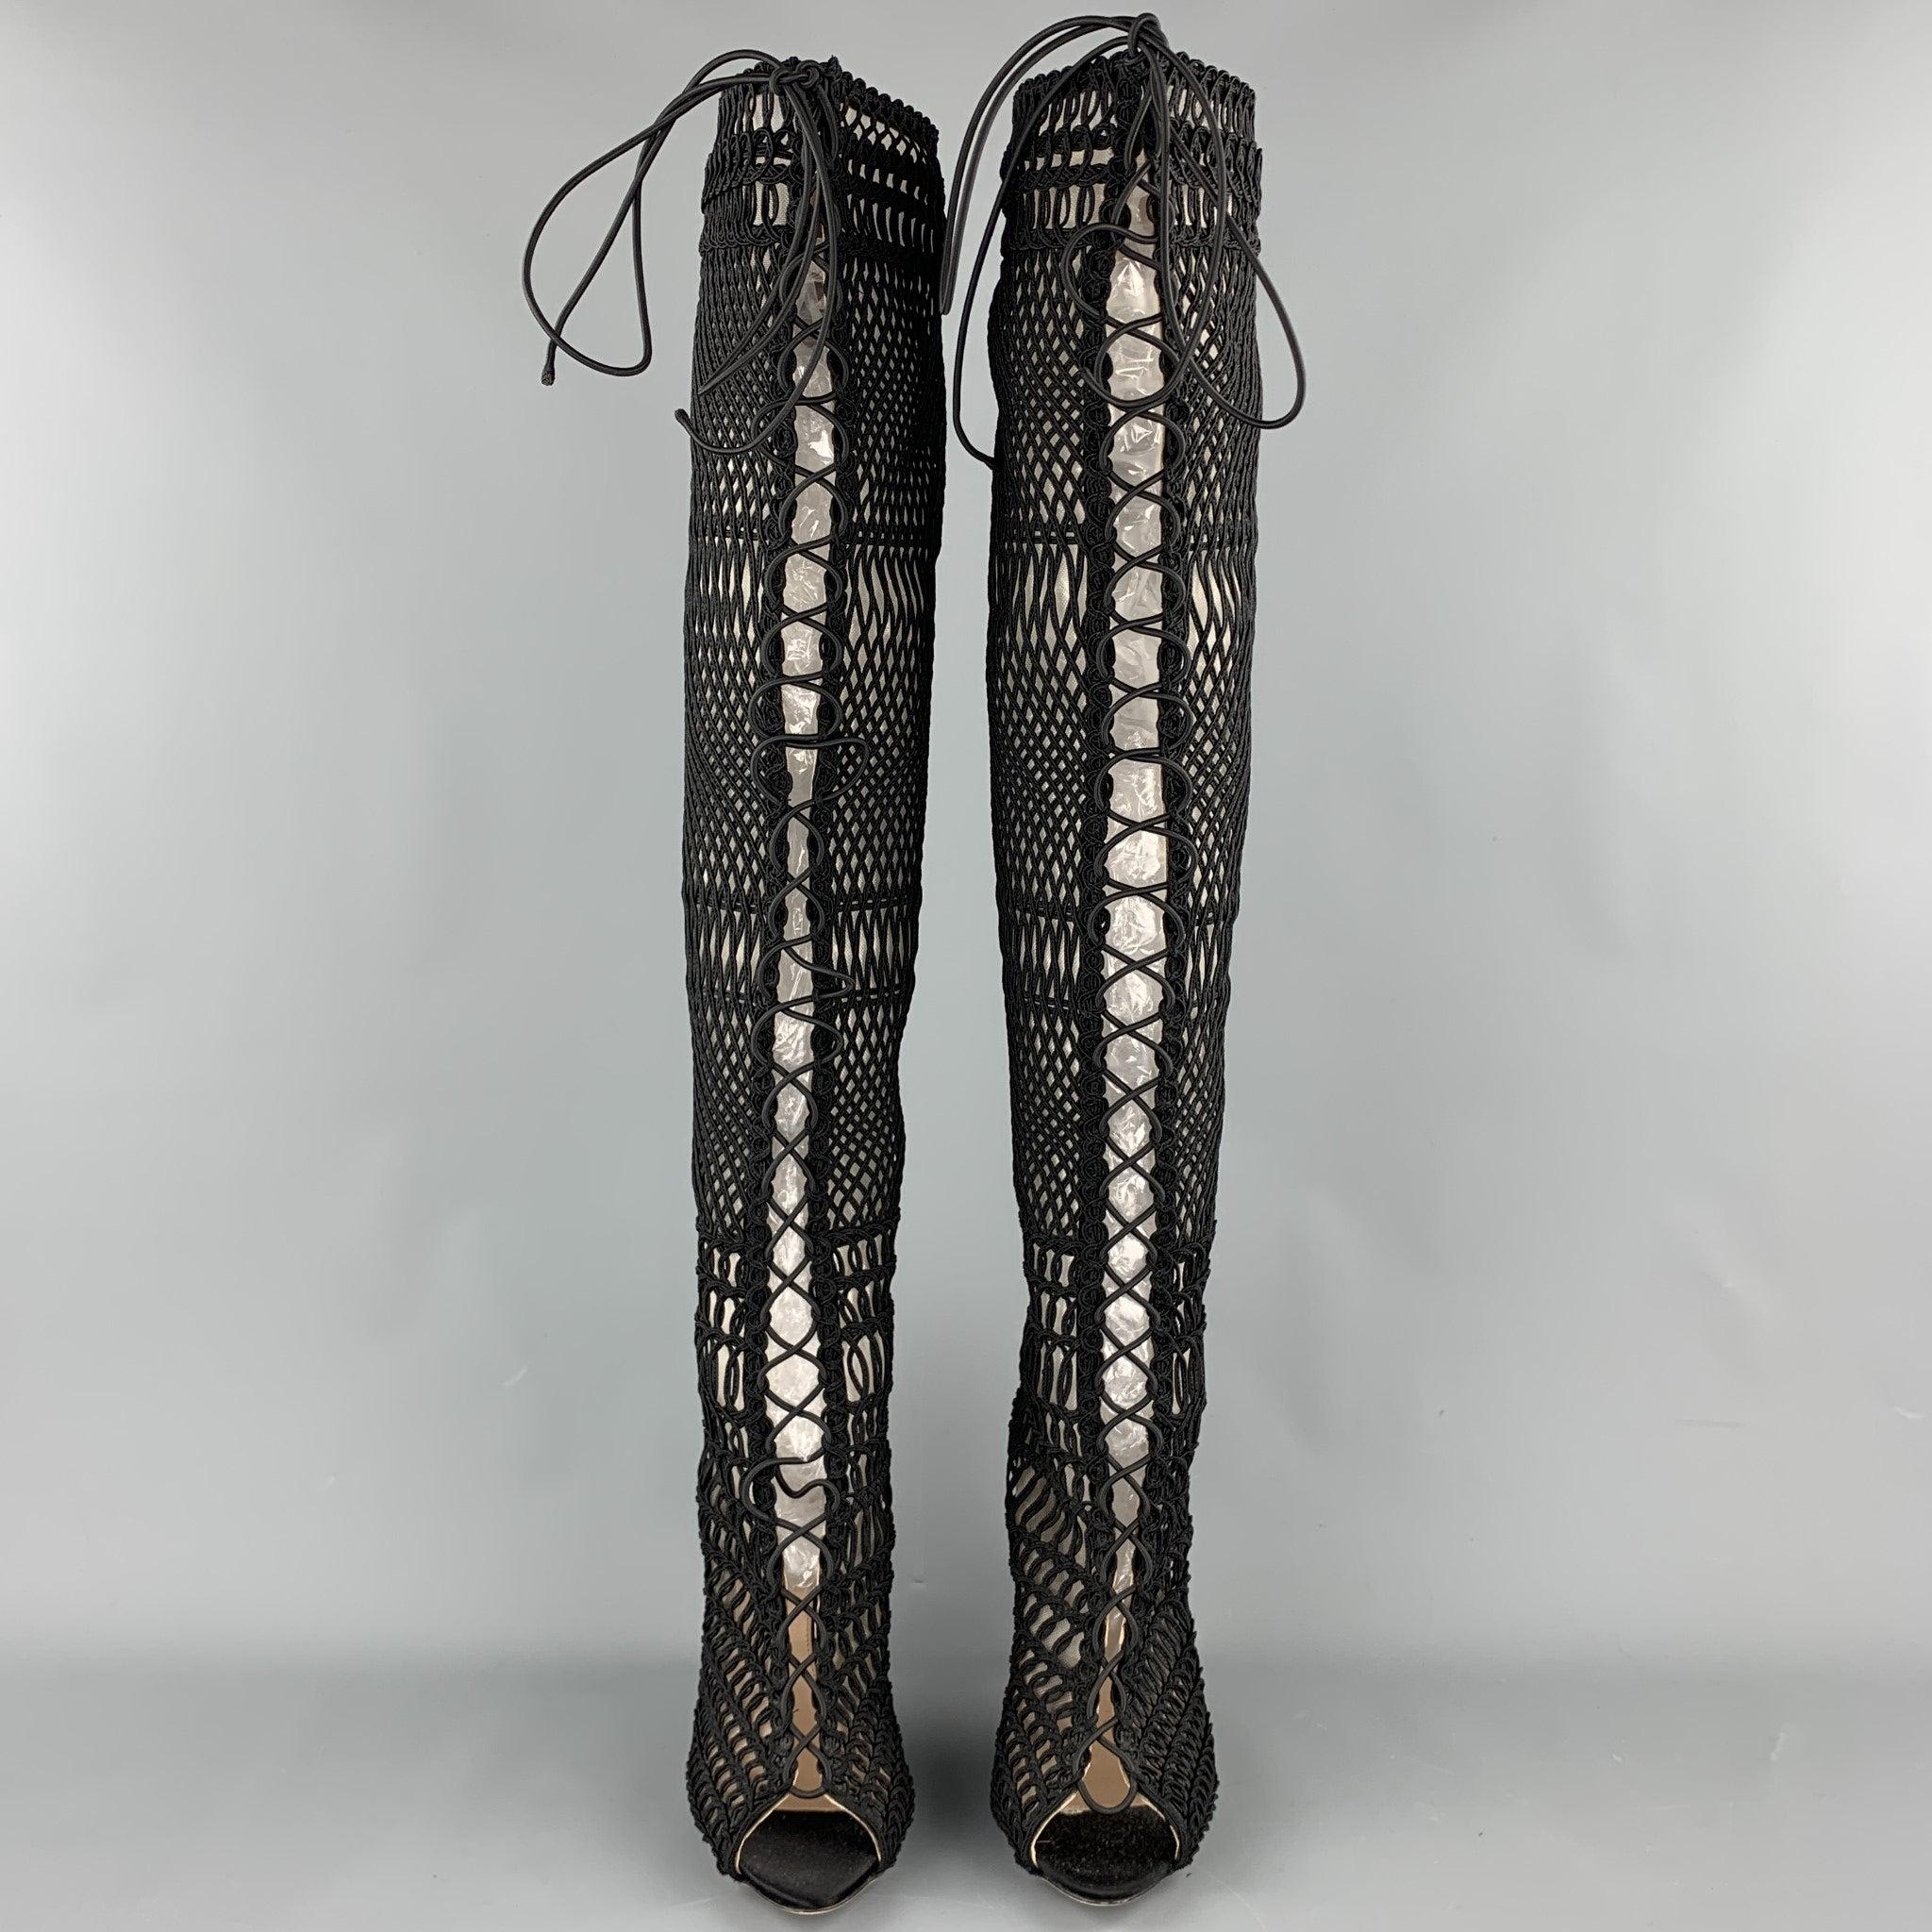 GIAMBATTISTA VALLI boots comes in a black knitted material with a mesh liner featuring a knee high style, suede trim, open toe, lace up, and a back zip up closure. Made in Italy.Very Good Pre-Owned Condition. 
Right boot repair at top interior.